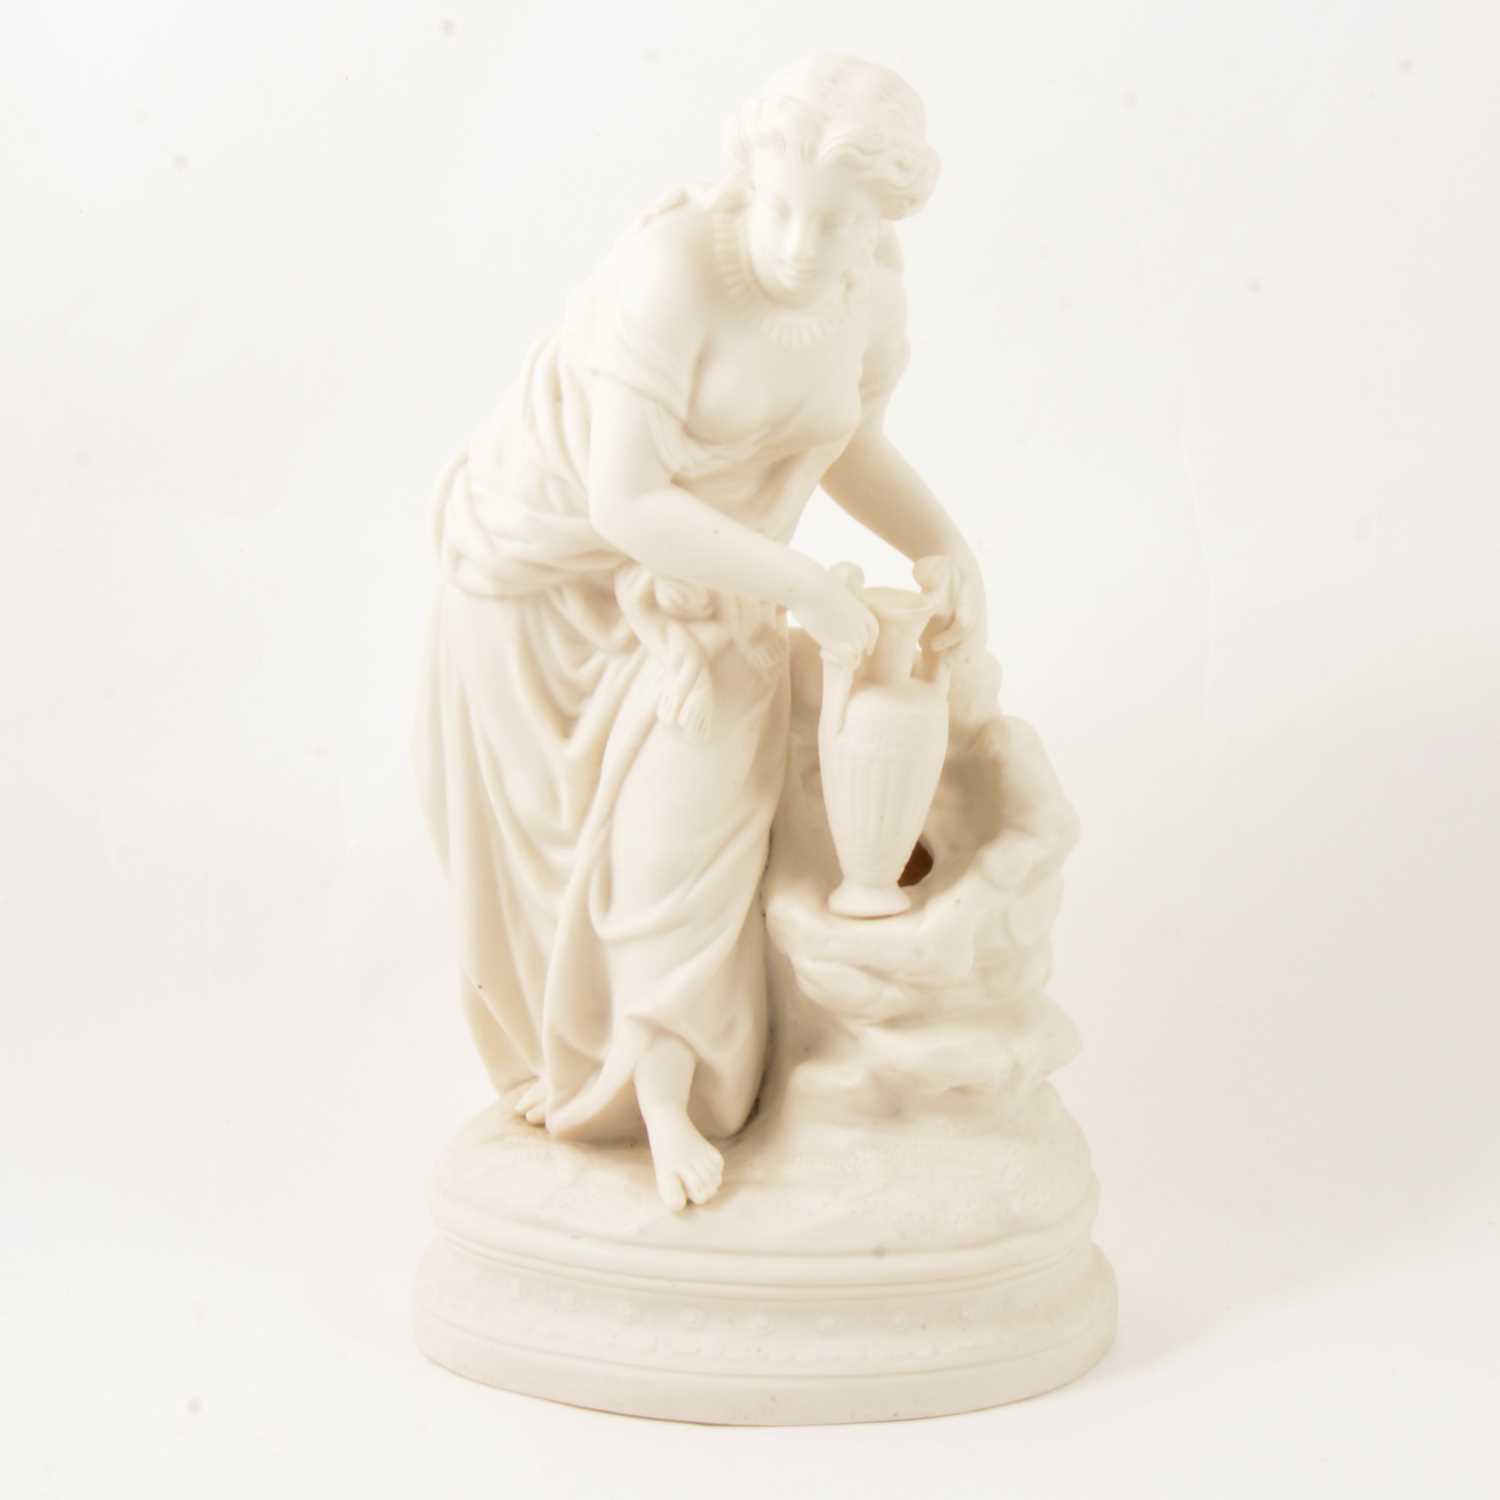 Lot 73 - Parian figure, Rebecca at the Well.